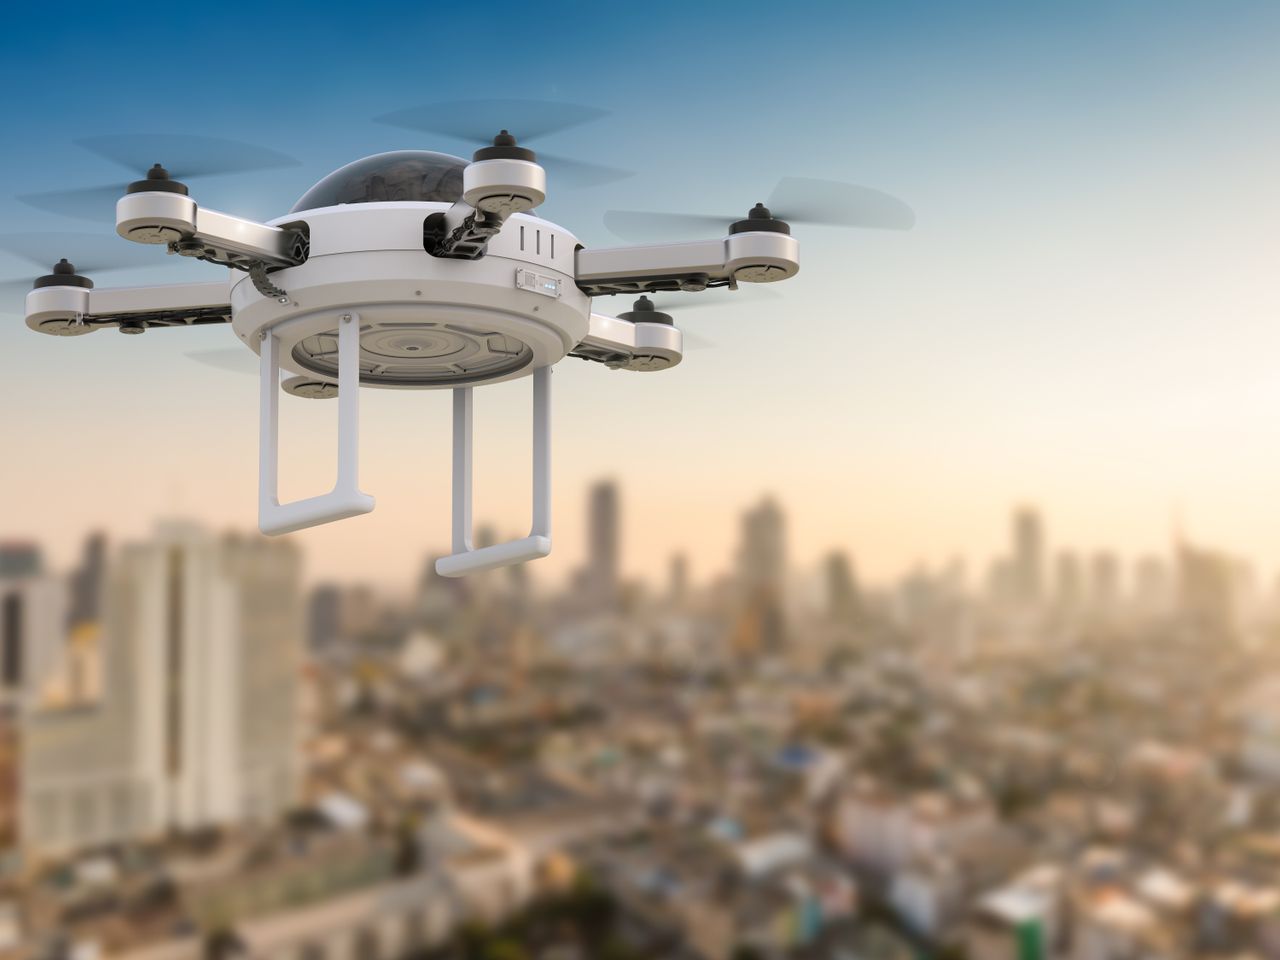 Technology Innovation Trends in Drones